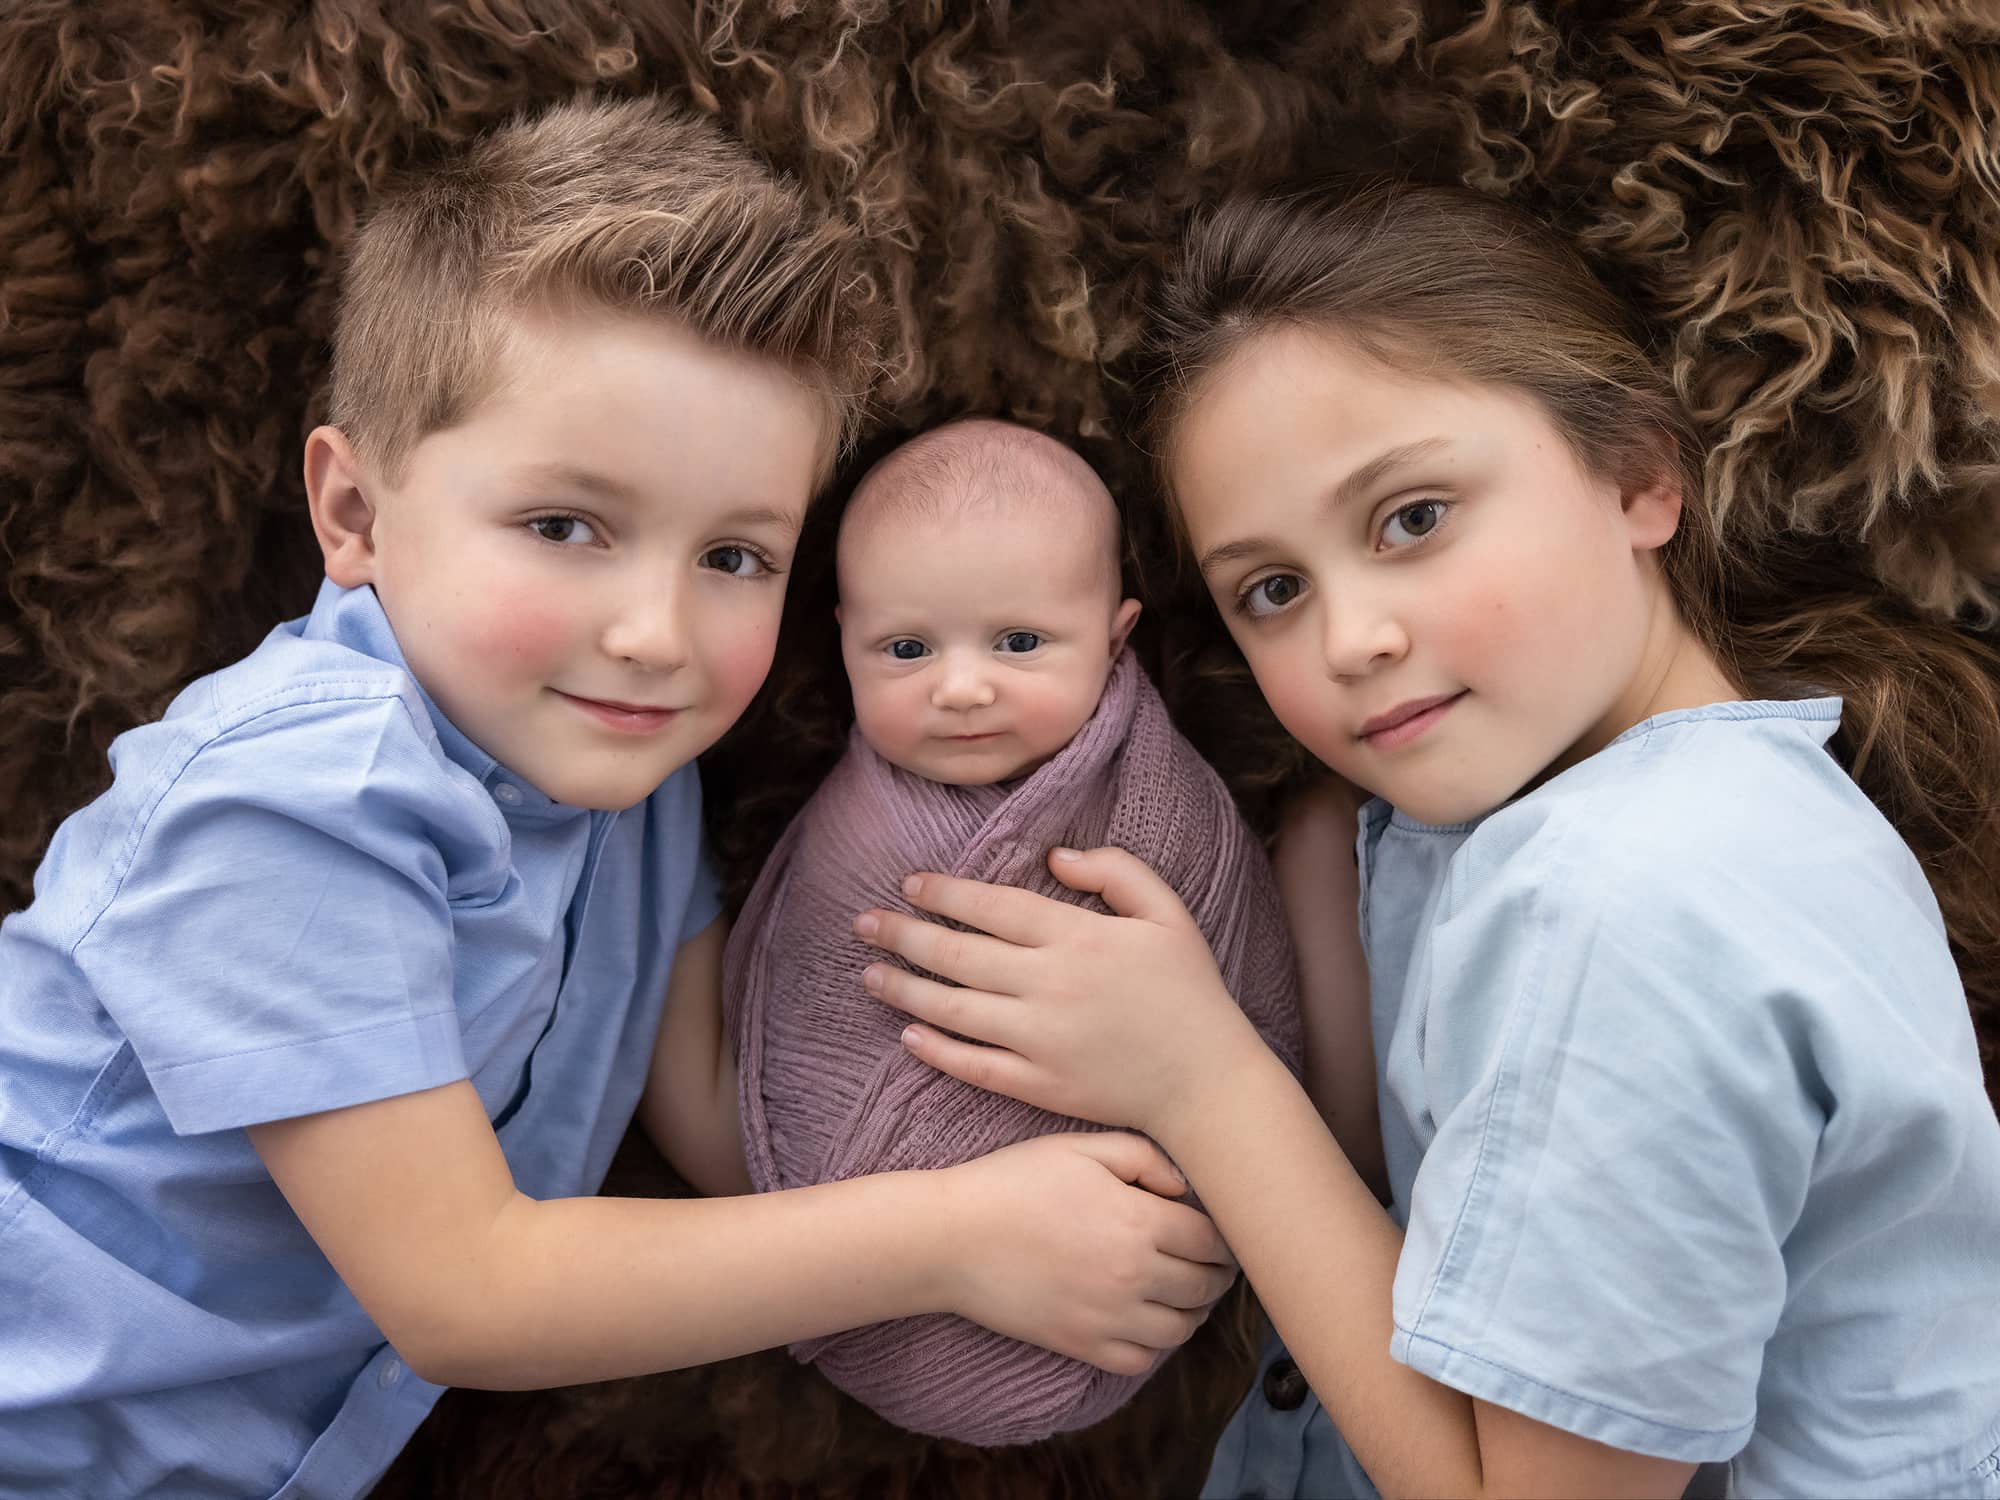 A brother and Sister cuddle their newborn baby sister on a brown rug